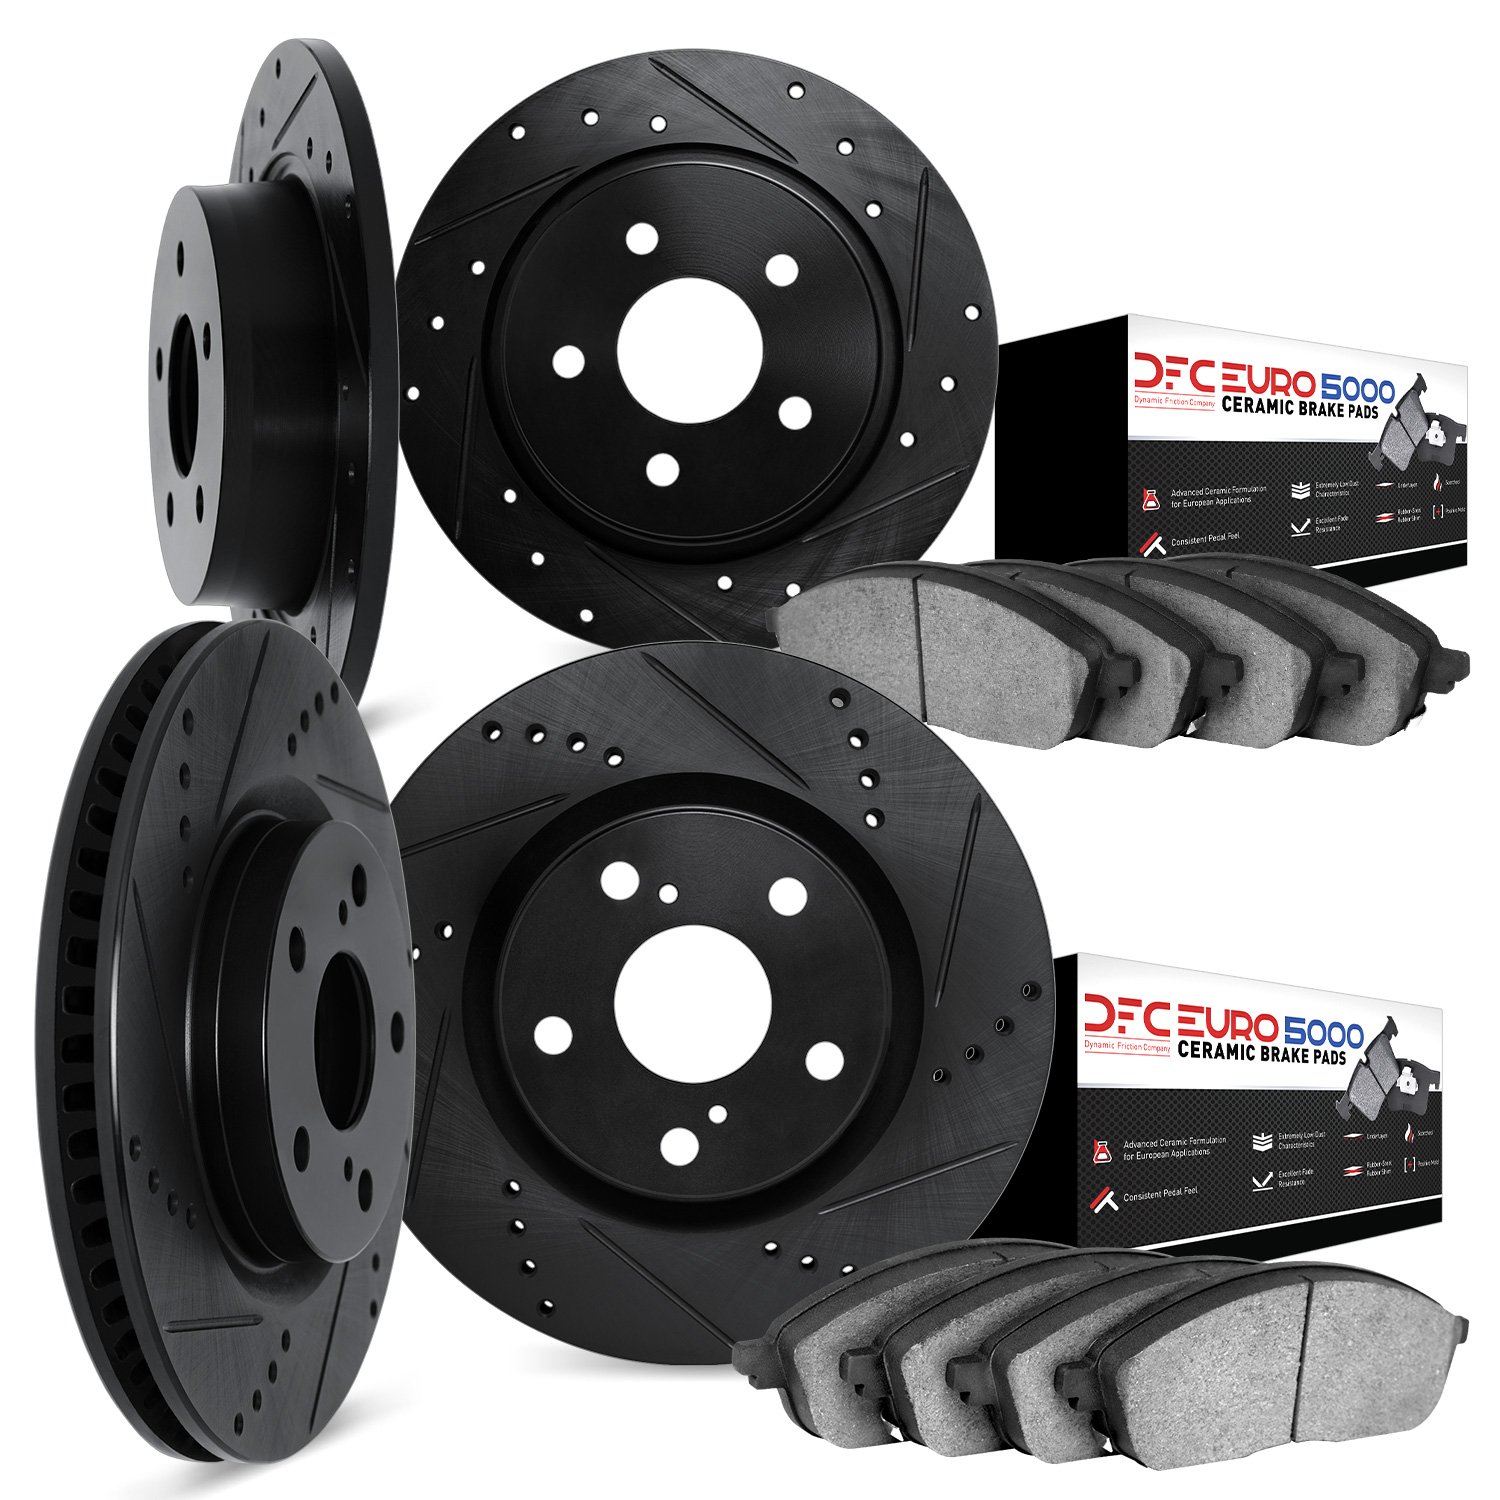 8604-63011 Drilled/Slotted Brake Rotors w/5000 Euro Ceramic Brake Pads Kit [Black], 2001-2015 Mercedes-Benz, Position: Front and